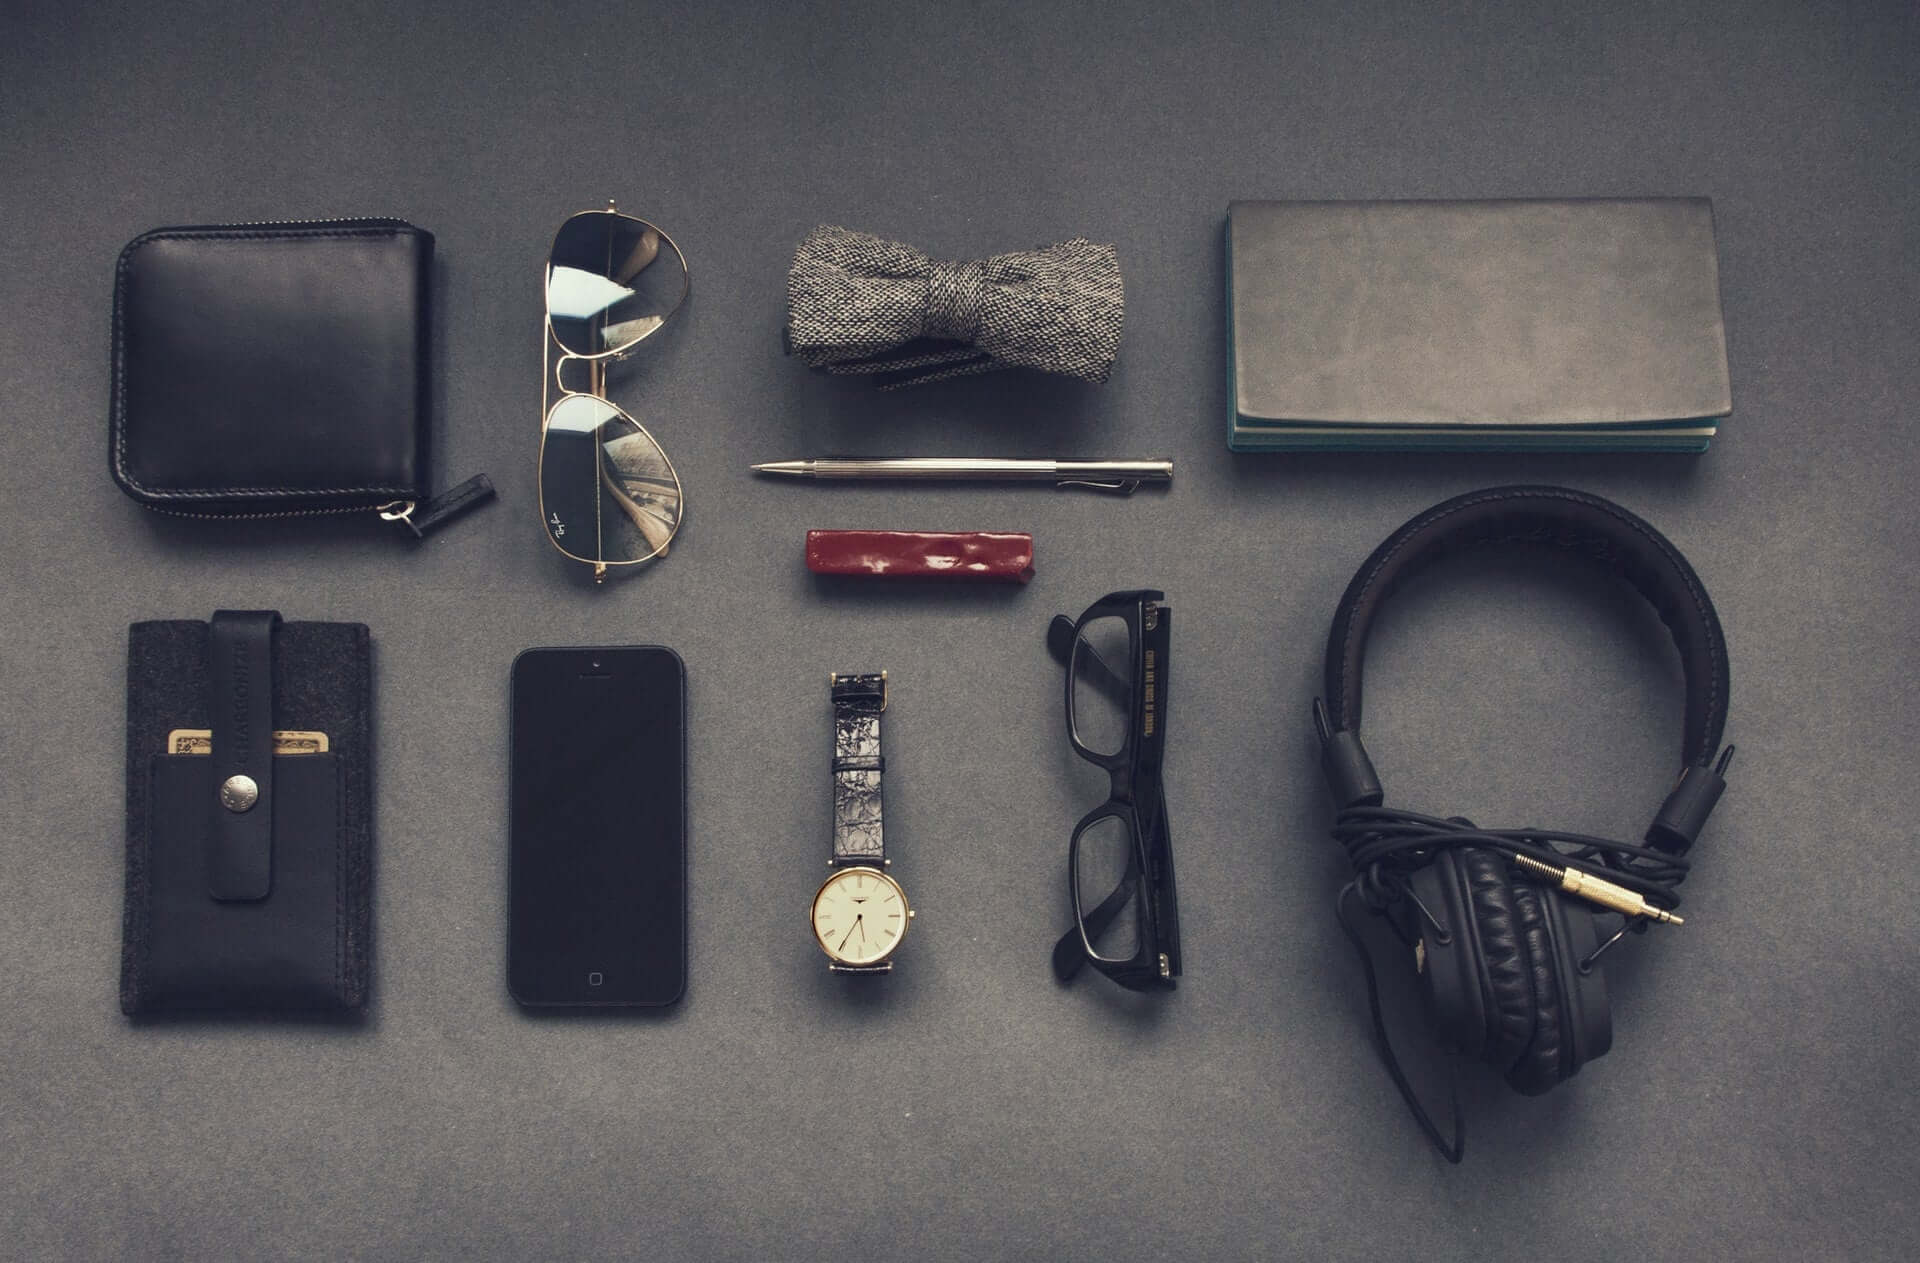 An overhead shot of a flatlay of day-to-day items including a wallet, sunglasses, glasses, headphones, a watch, a phone, and a bowtie.